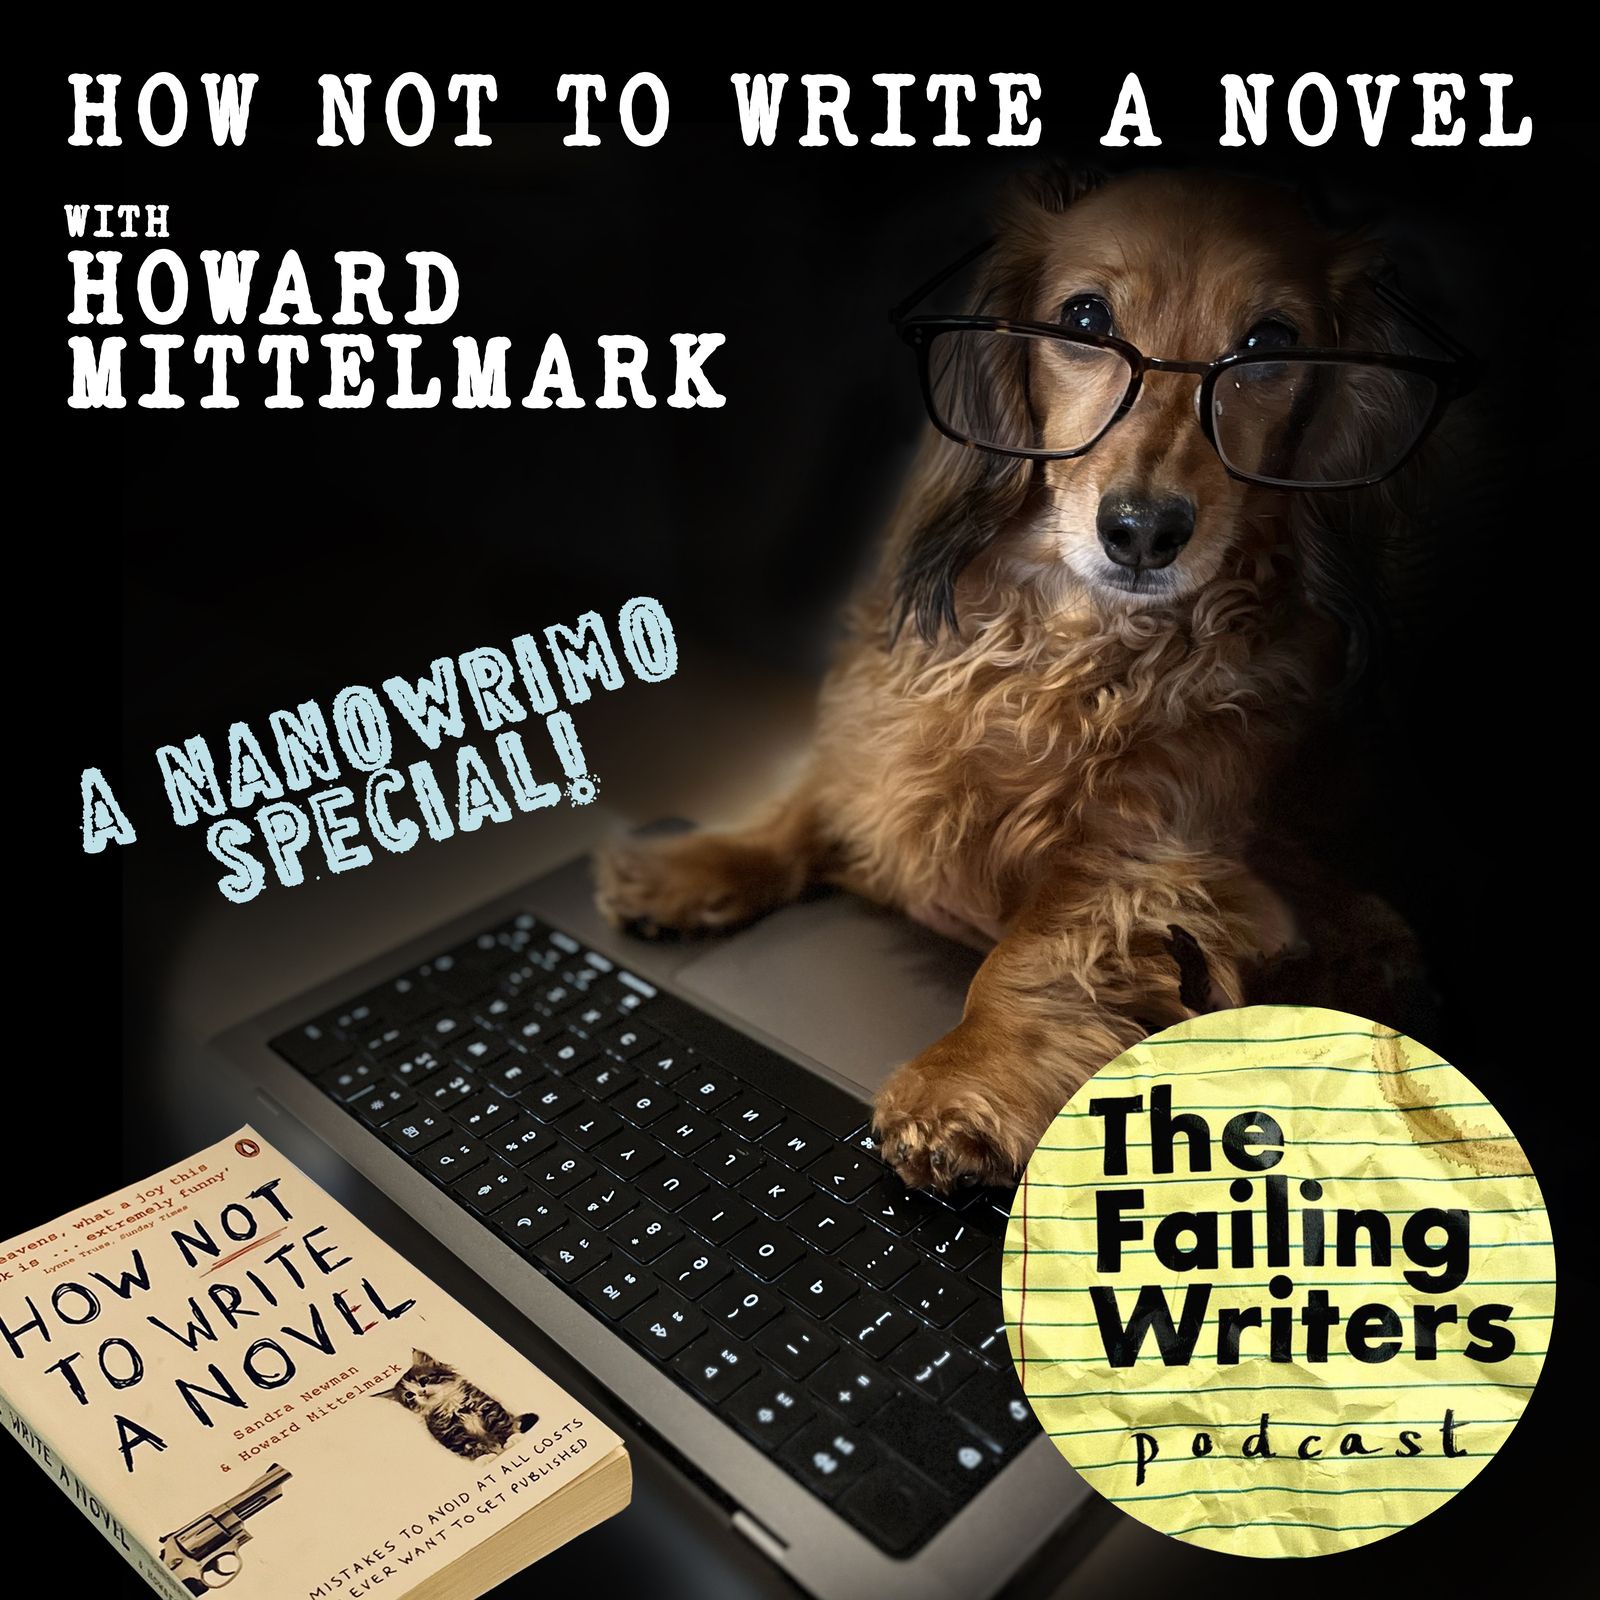 S3 Ep22: Nanowrimo Special: How NOT to write a novel with Howard Mittelmark